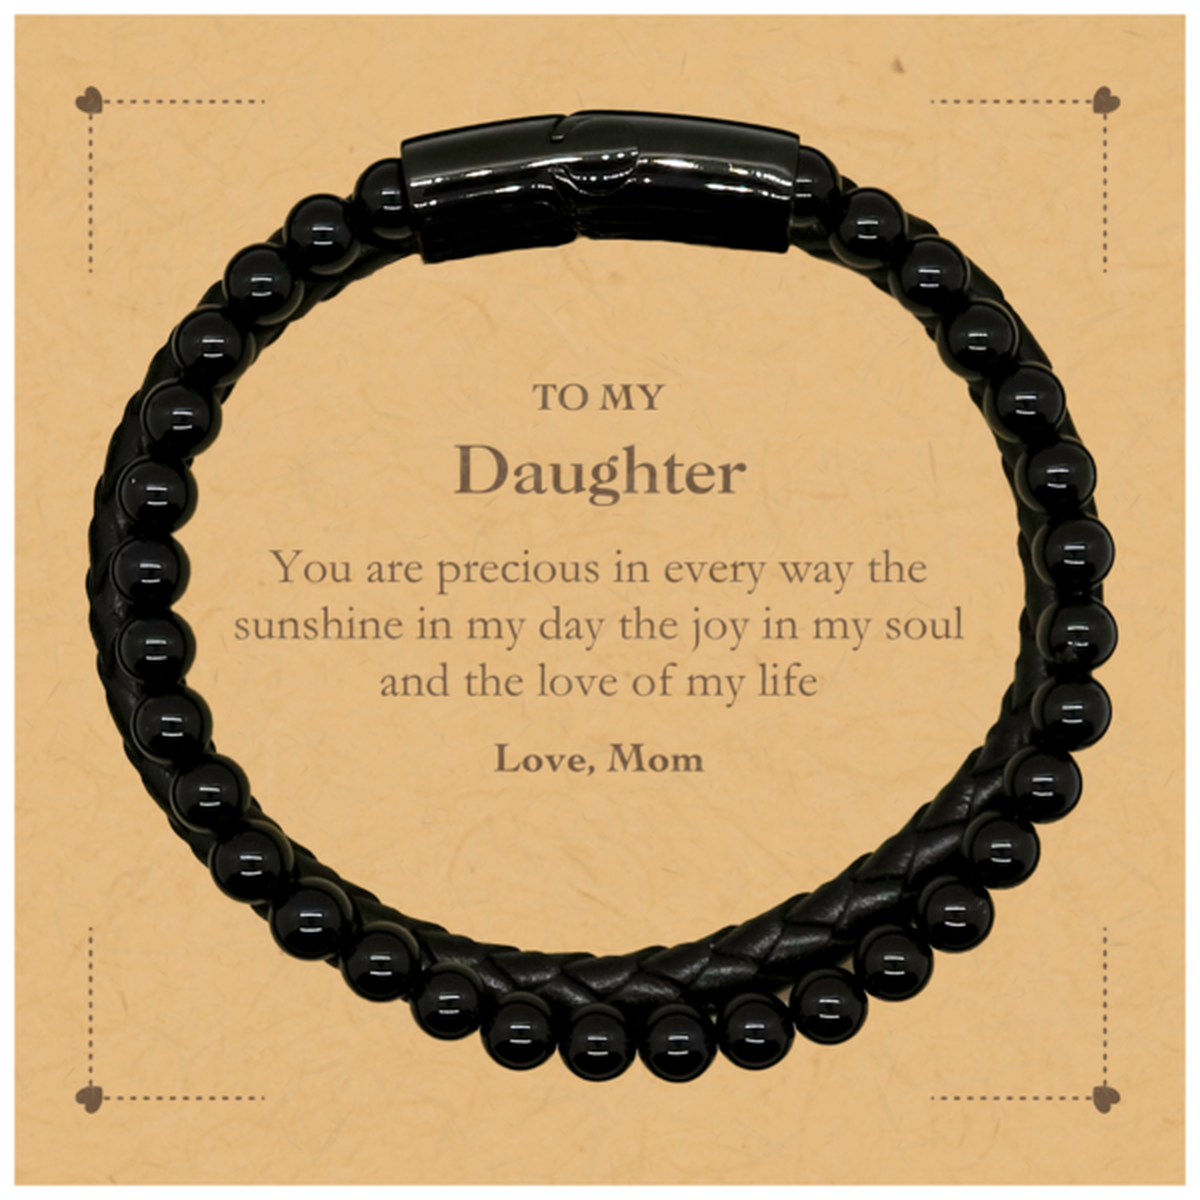 Graduation Gifts for Daughter Stone Leather Bracelets Present from Mom, Christmas Daughter Birthday Gifts Daughter You are precious in every way the sunshine in my day. Love, Mom